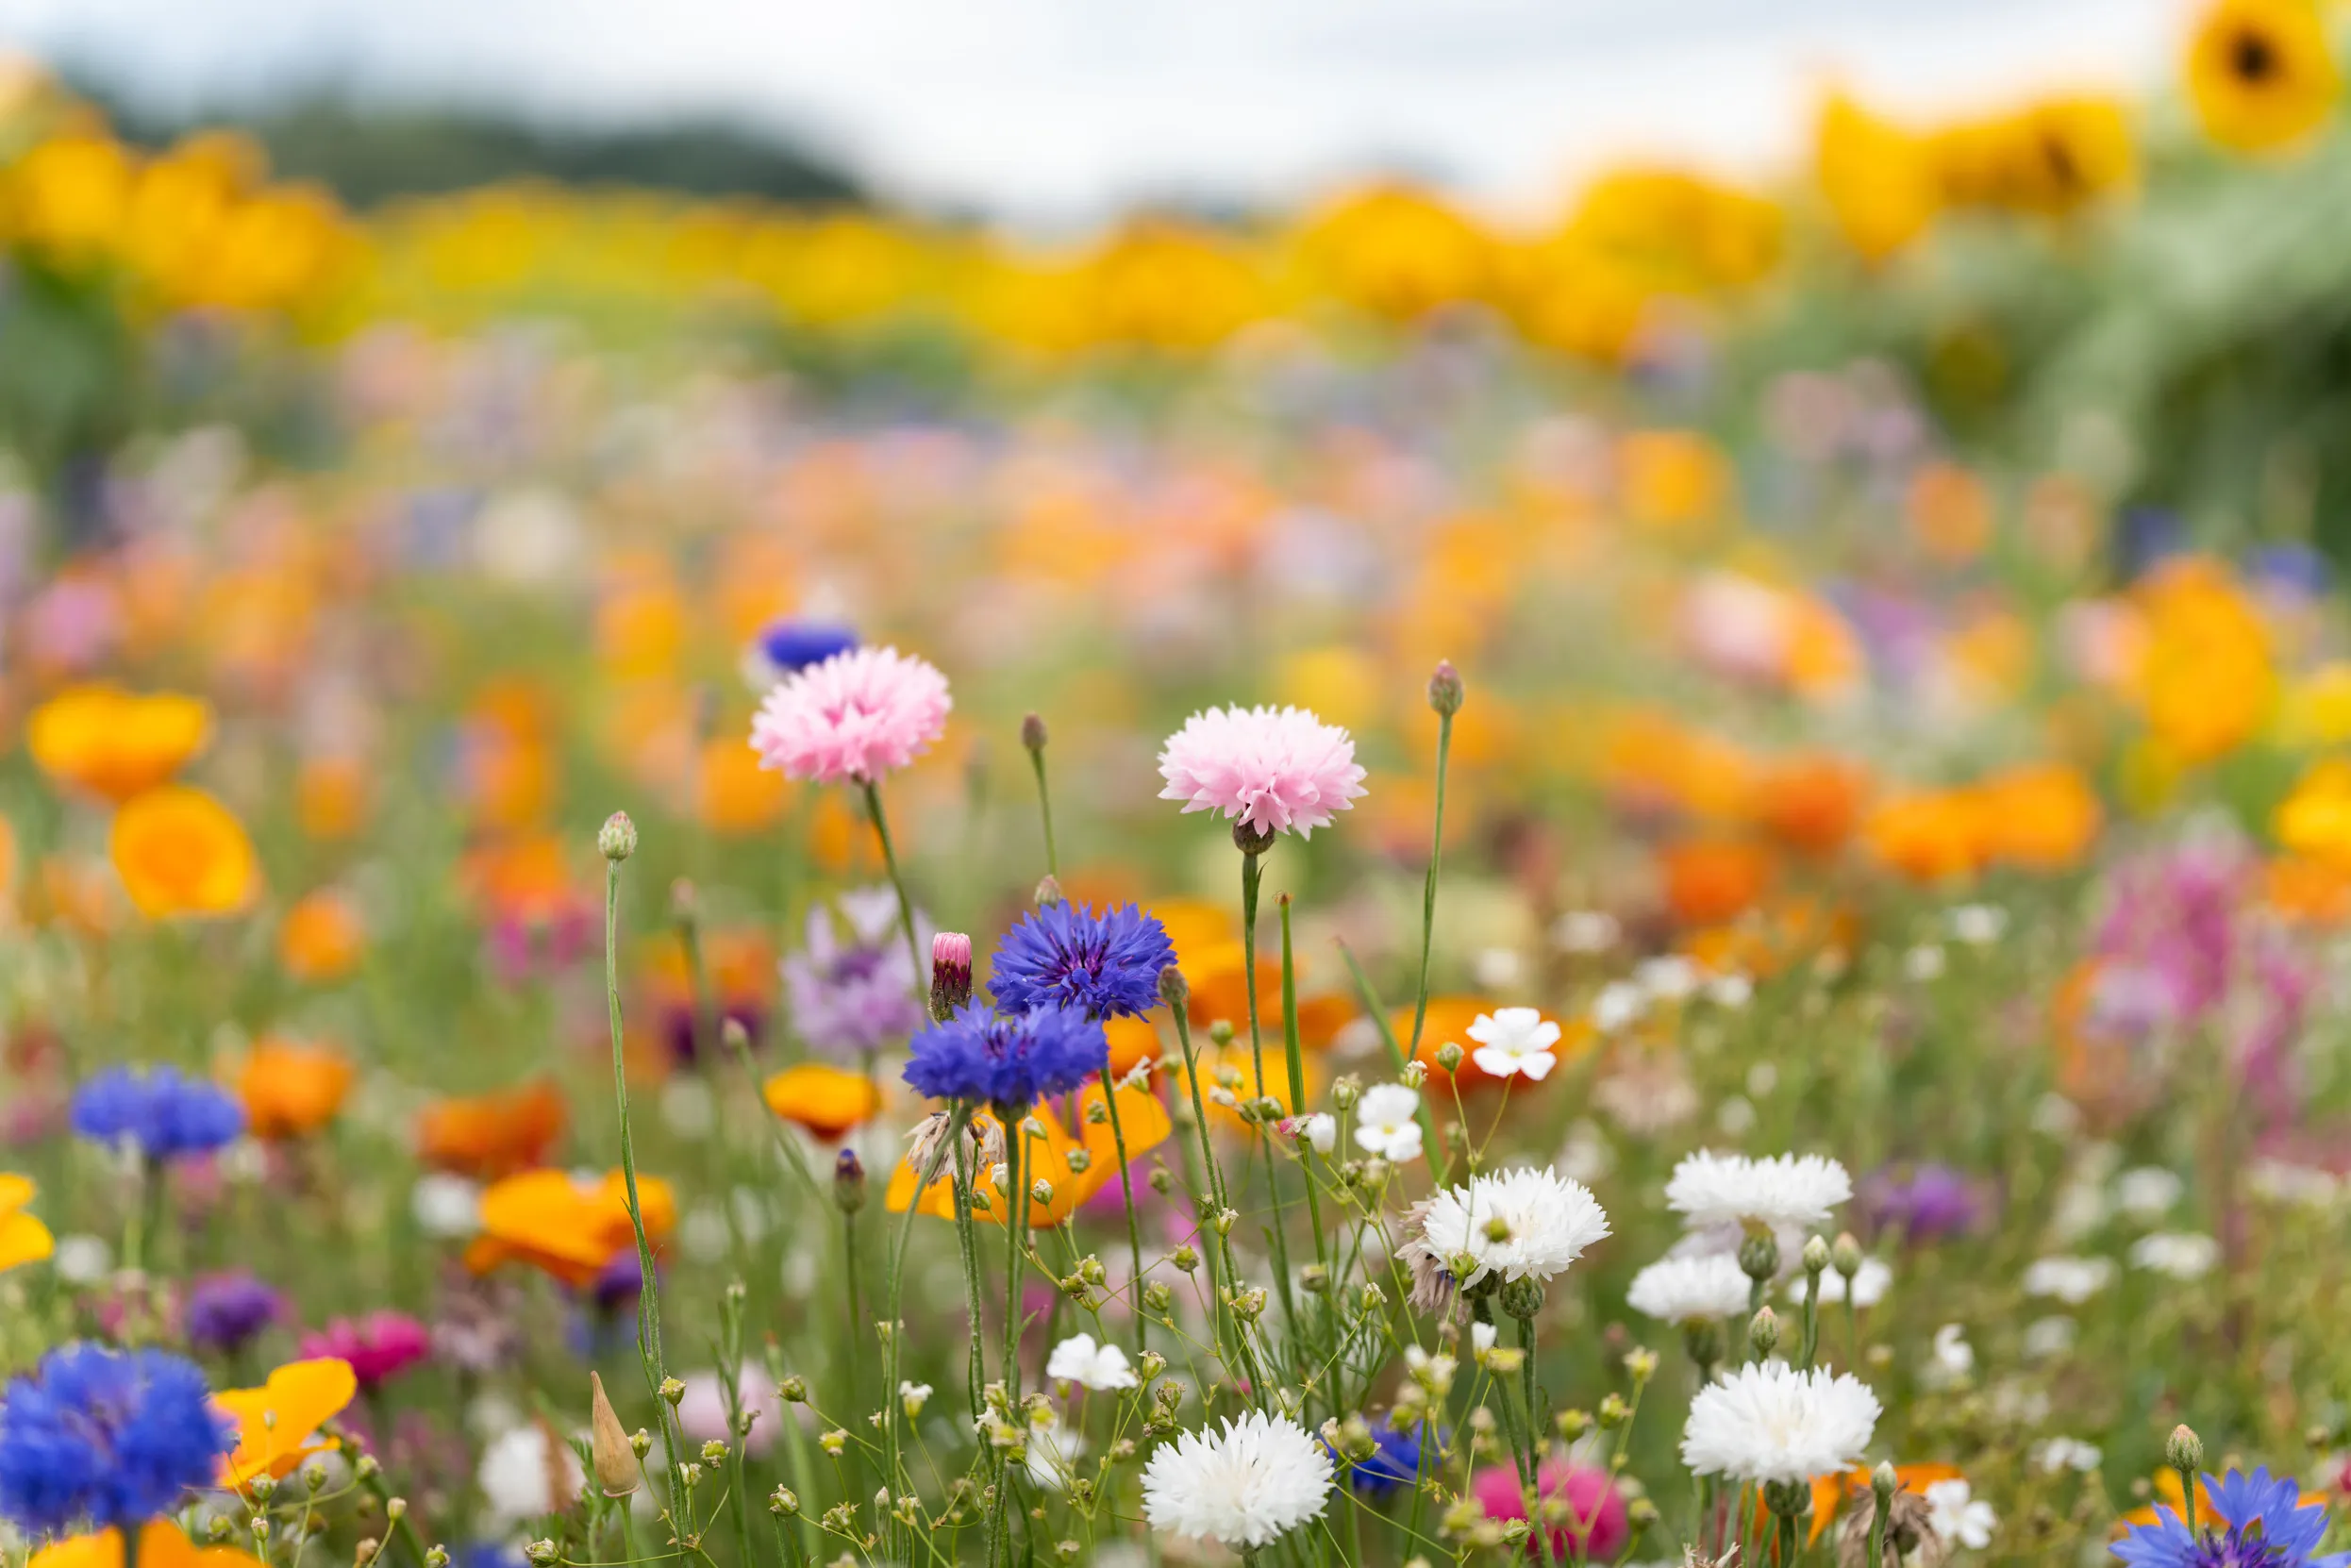 A meadow filled with a mixture of colourful wildflowers, with blue, pink and white Cornflowers in the foreground.